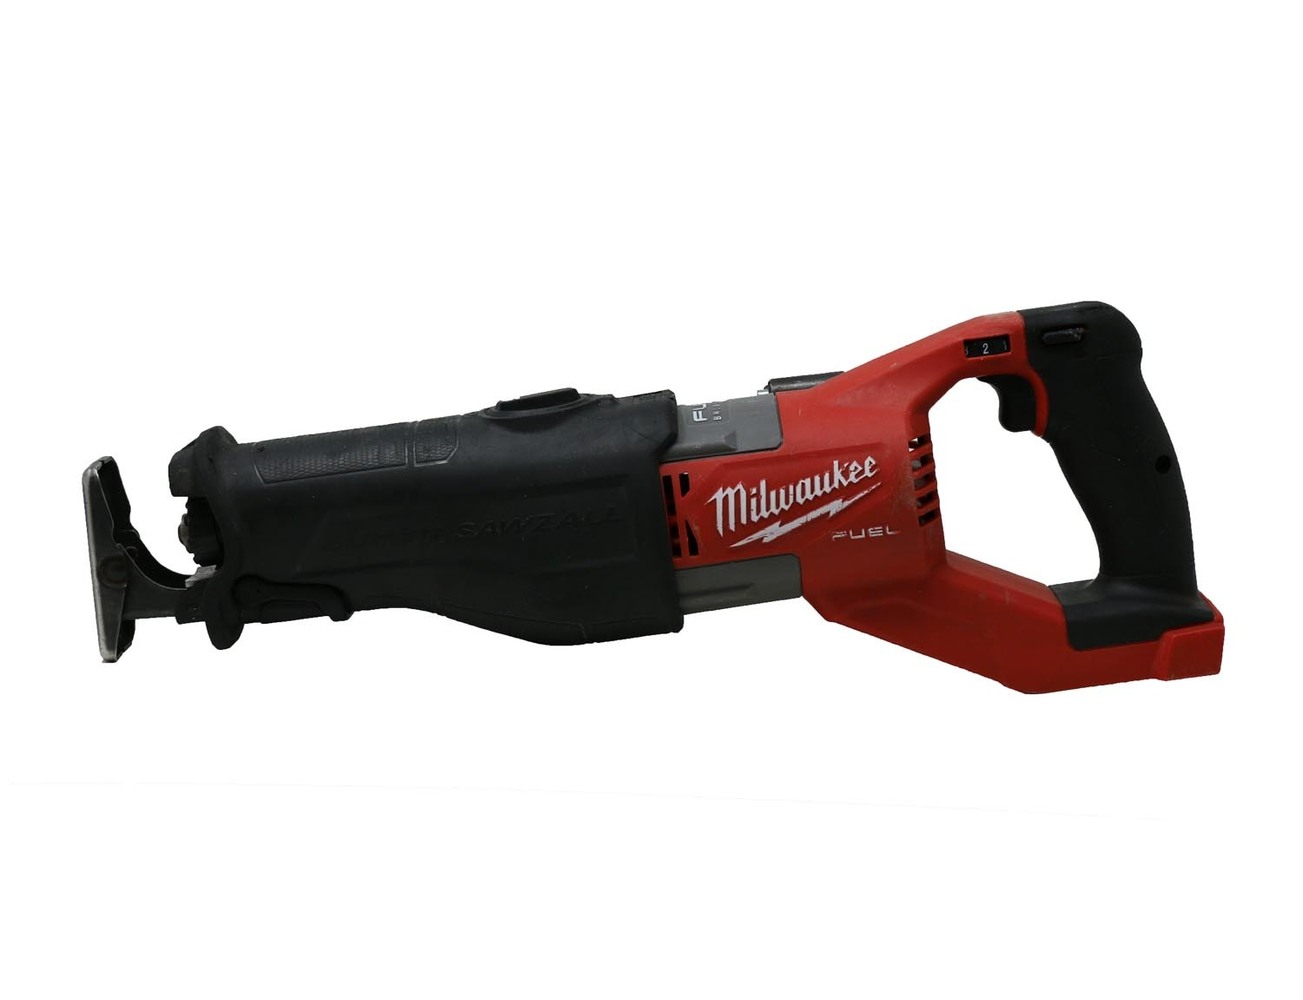 MILWAUKEE M18 FUEL SUPER SAWZALL RECIPROCATING SAW TOOL ONLY